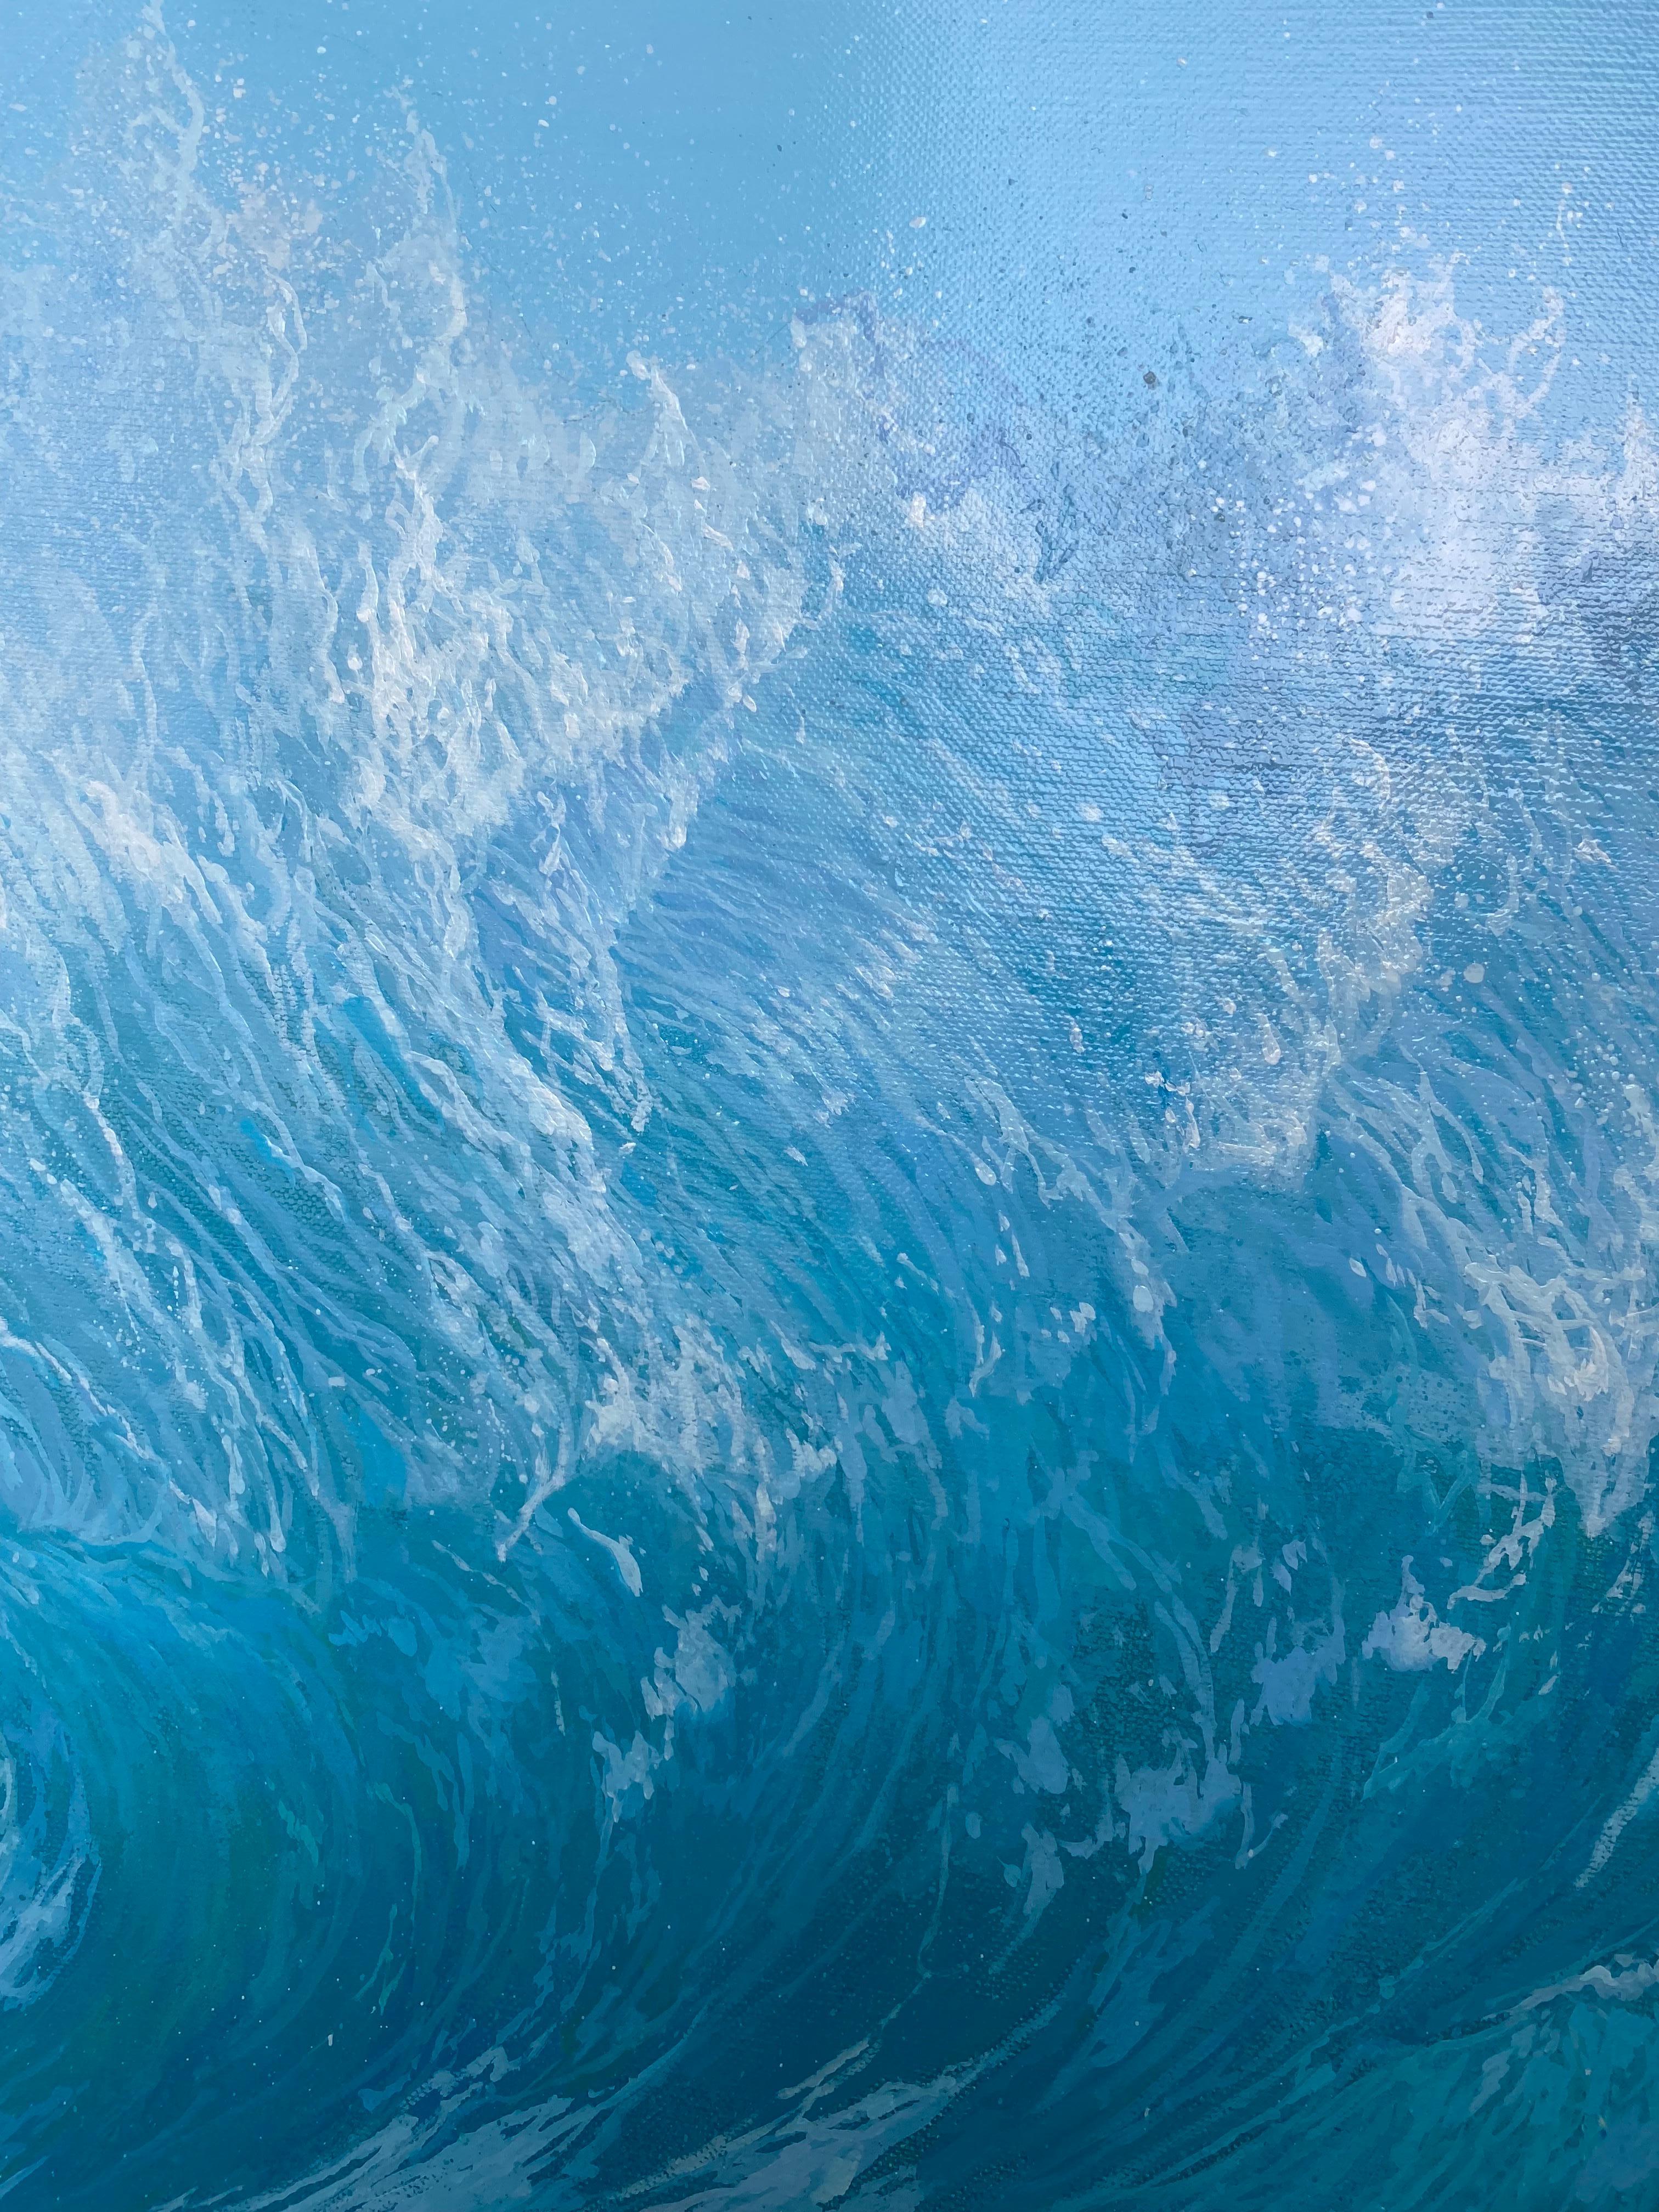 'Roaring seas' Contemporary powerful blue seascape painting of a crashing wave - Gray Landscape Painting by Marc Esteve